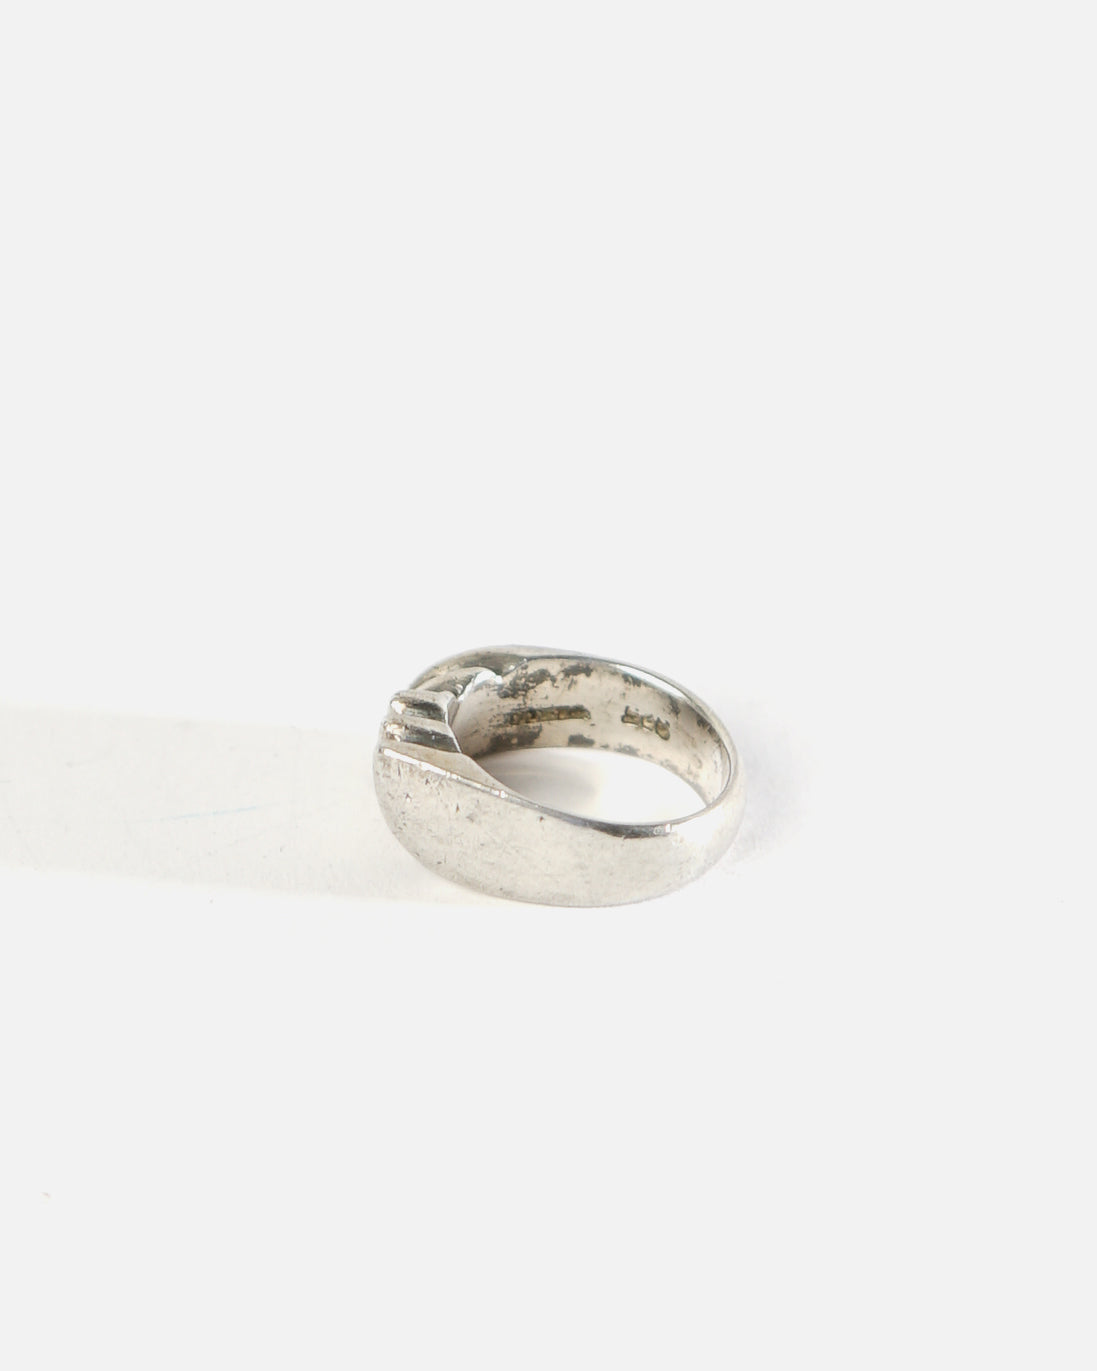 Silver Ring / size: 9